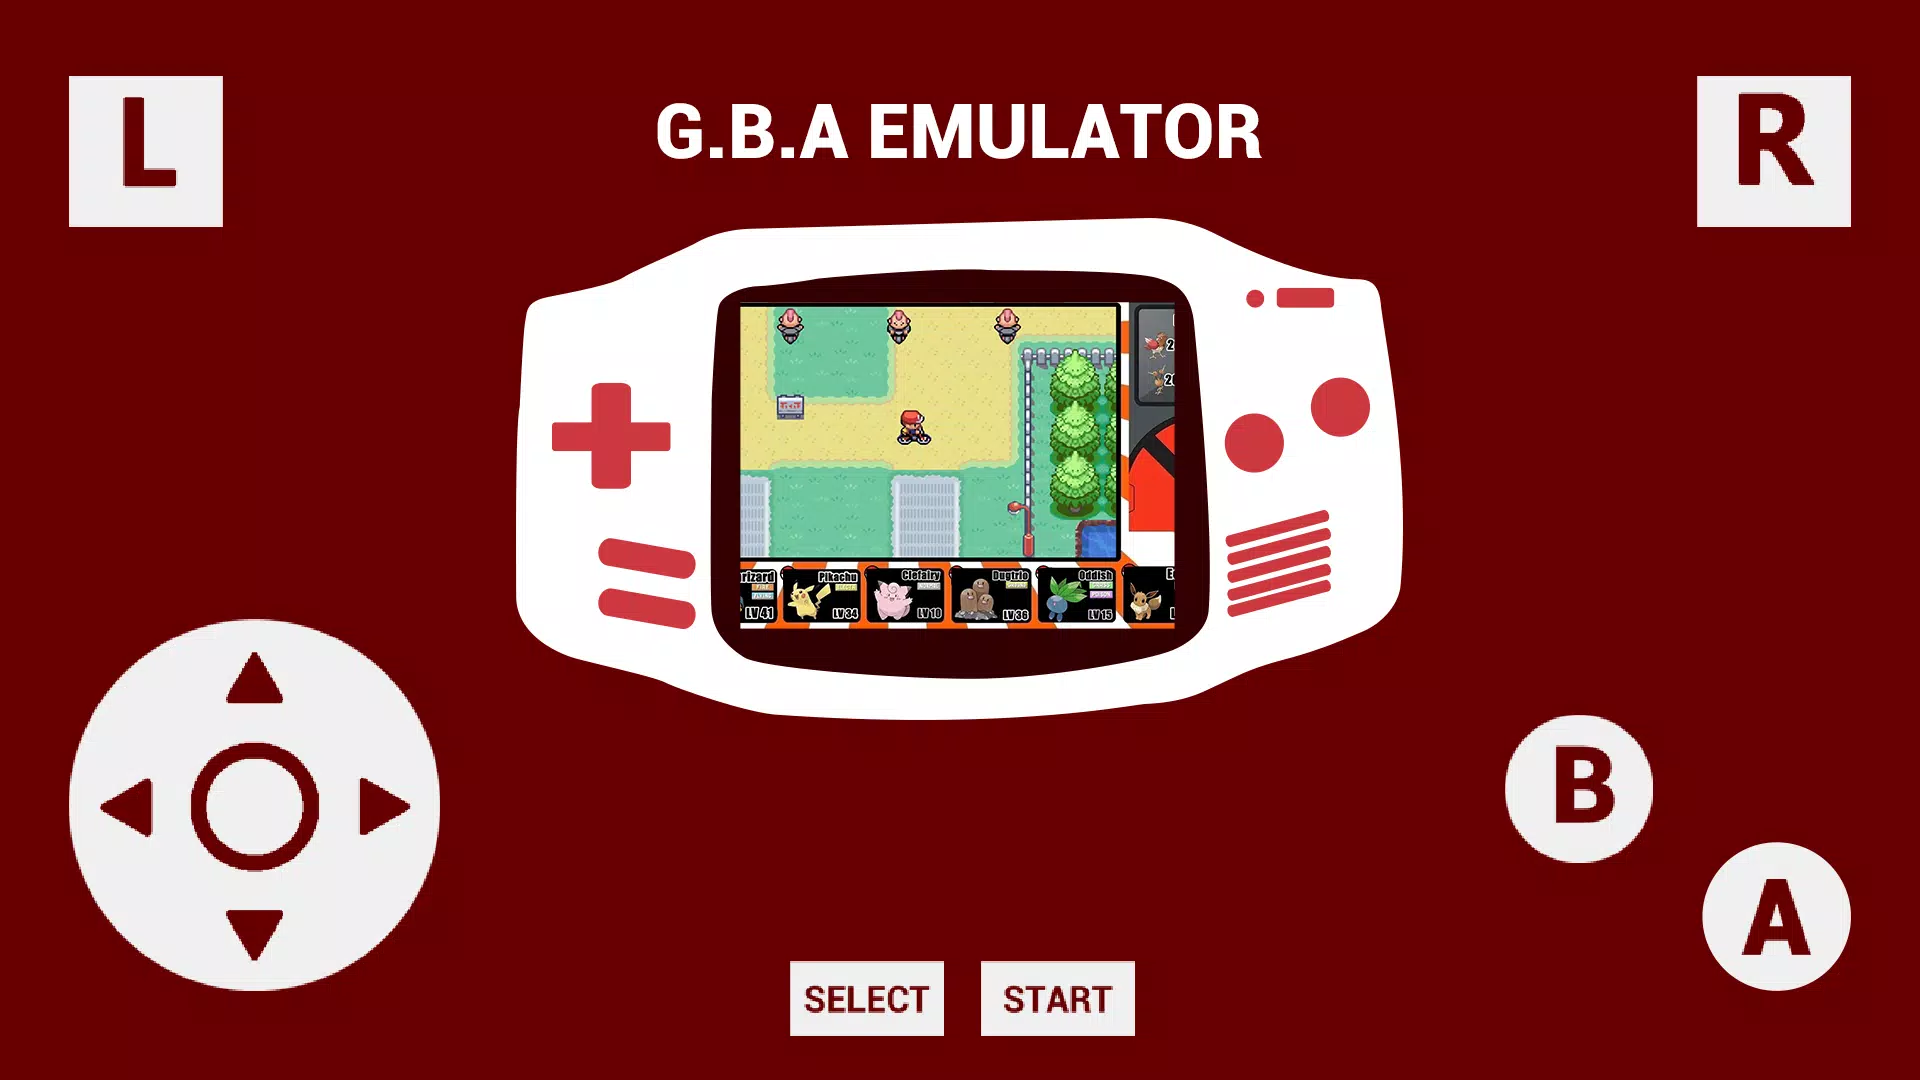 John GBA APK Download for Android Free